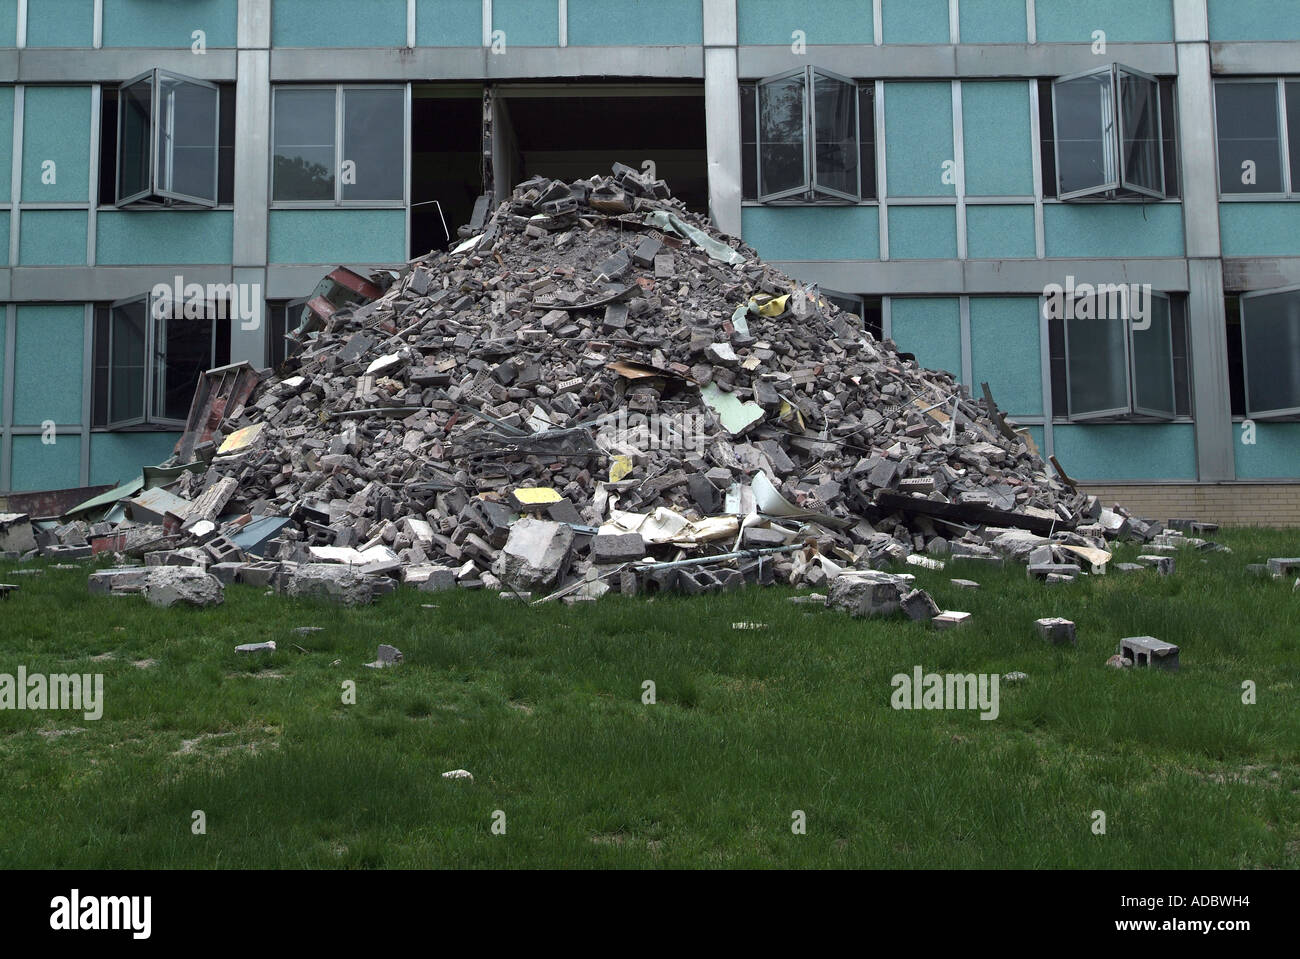 Pile of Debris under a building window as building is being renovated Stock Photo